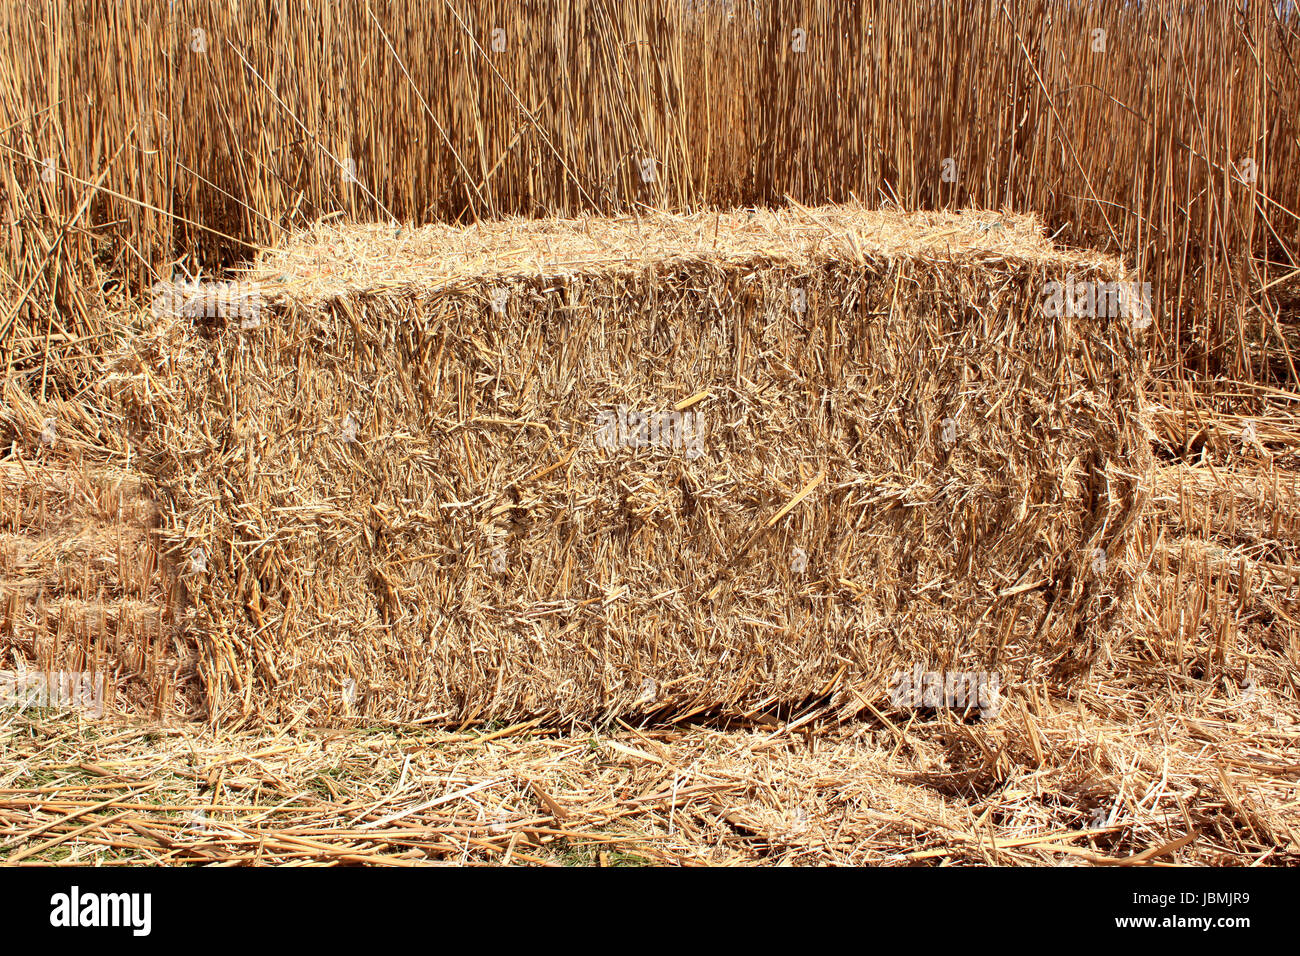 an agricultural field for an organic farming for the harvest of the reed in bundles Stock Photo